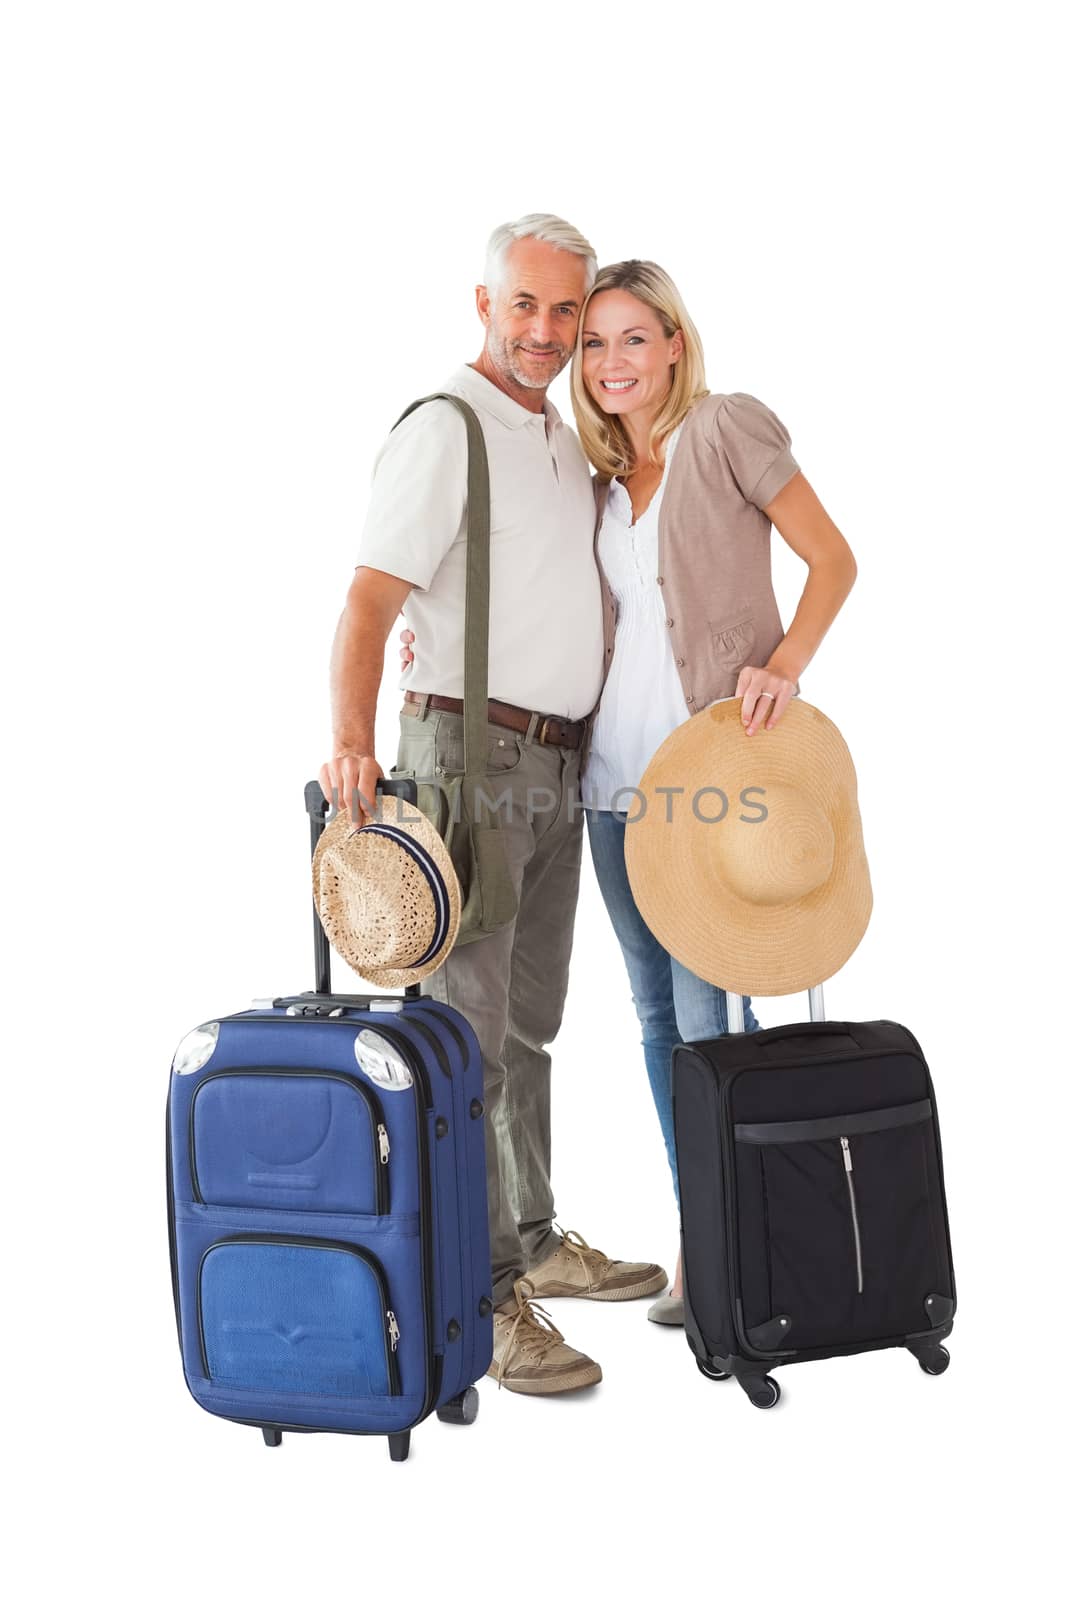 Happy couple ready to go on holiday on white background